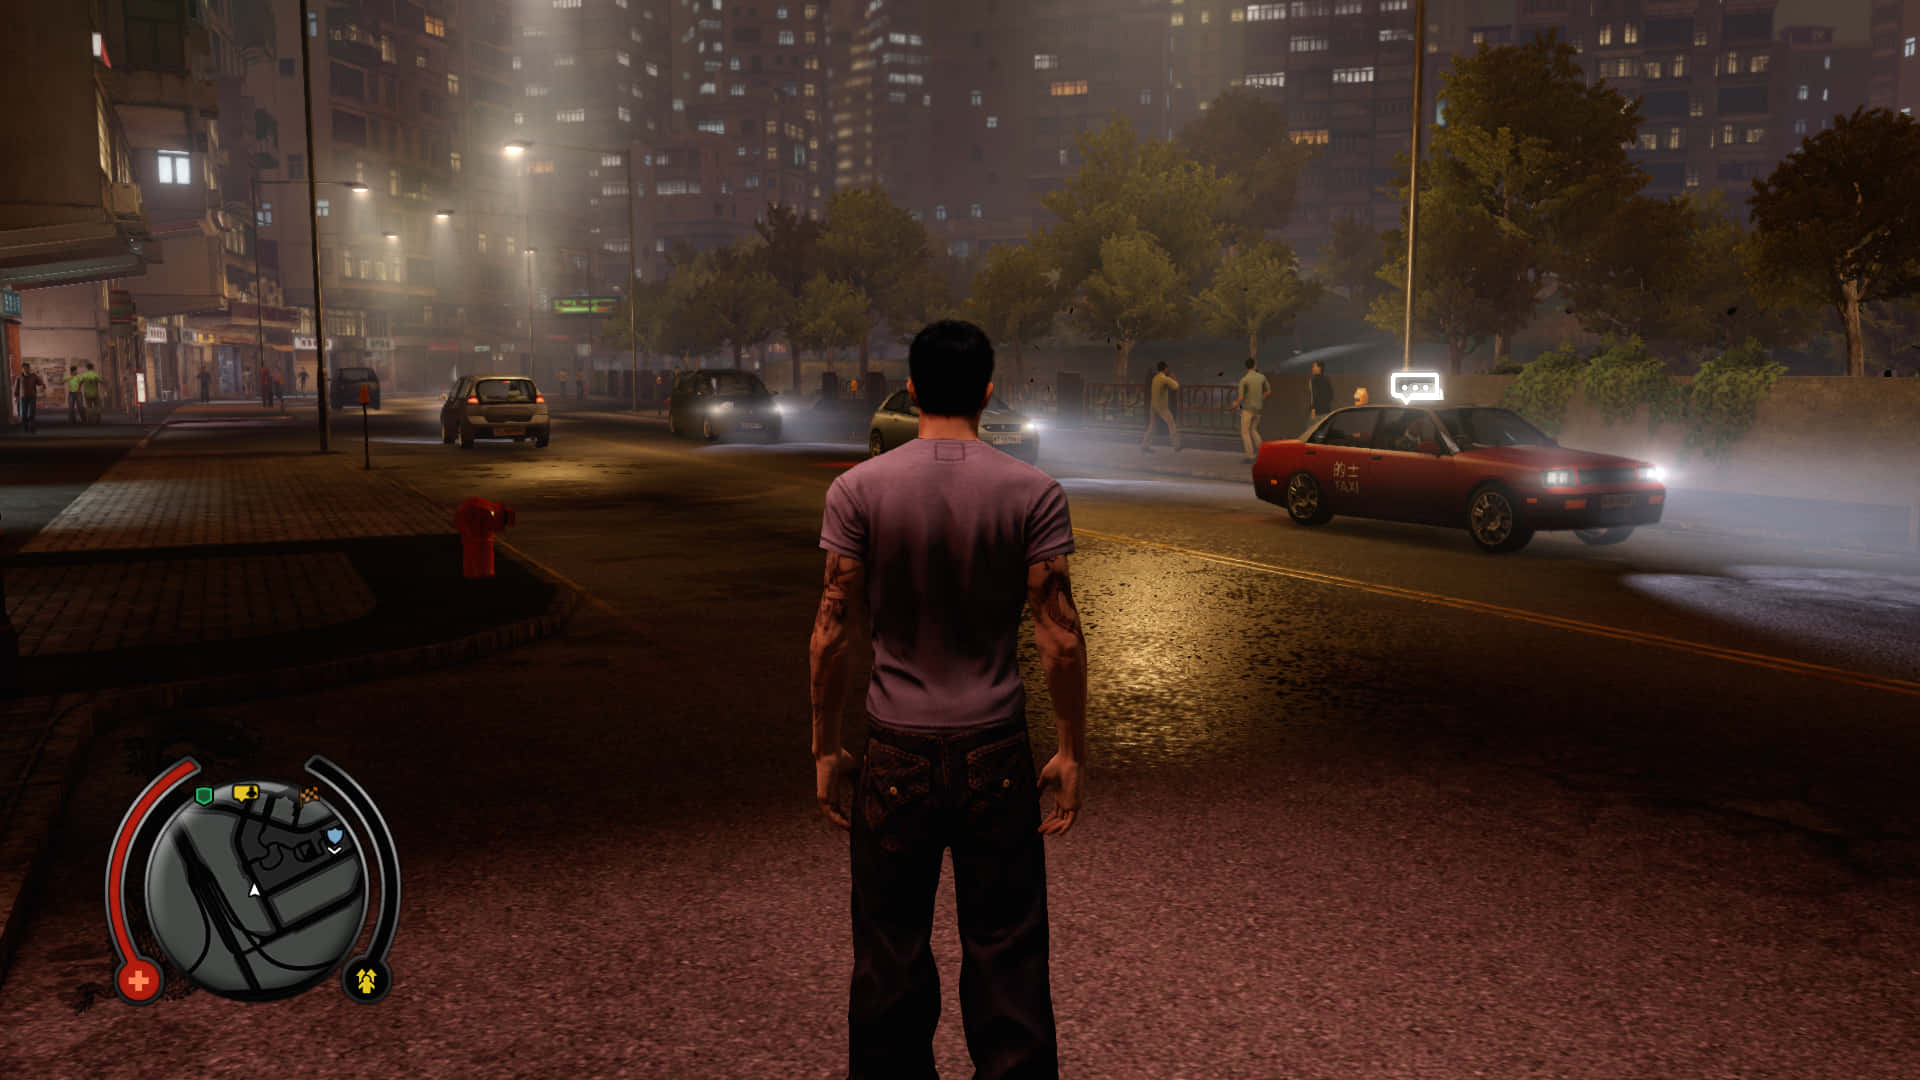 Sleeping Dogs: Definitive Edition Full Game Playthrough 4K 